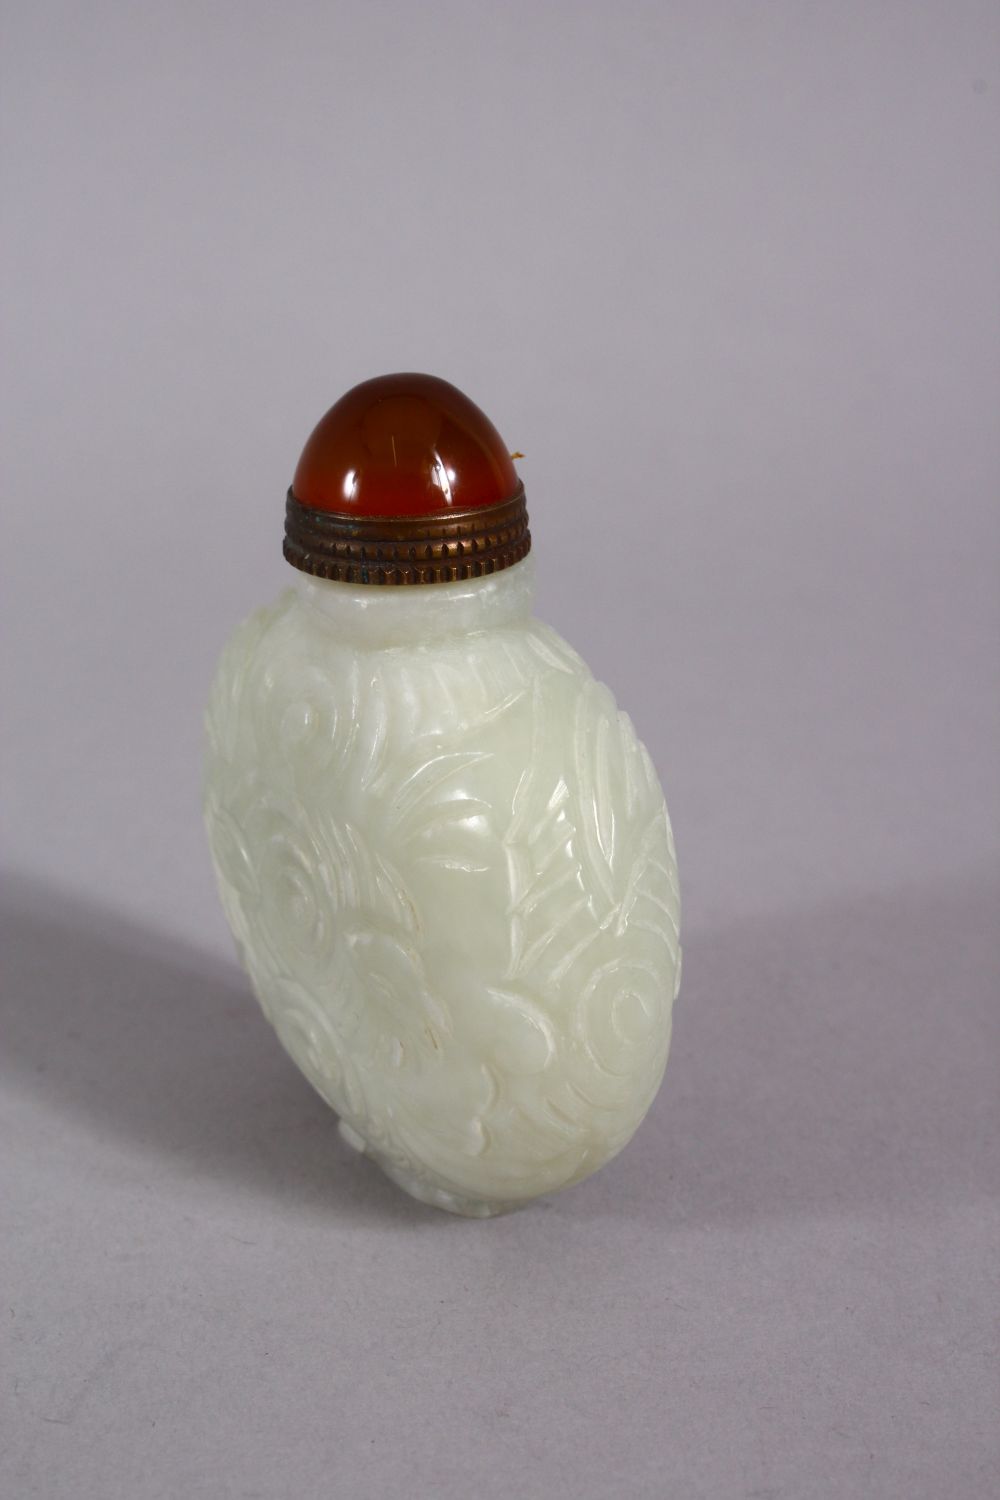 A CHINESE CARVED JADE SNUFF BOTTLE, carved with floral swirl decoration,with a hard stone stopper, - Image 2 of 4